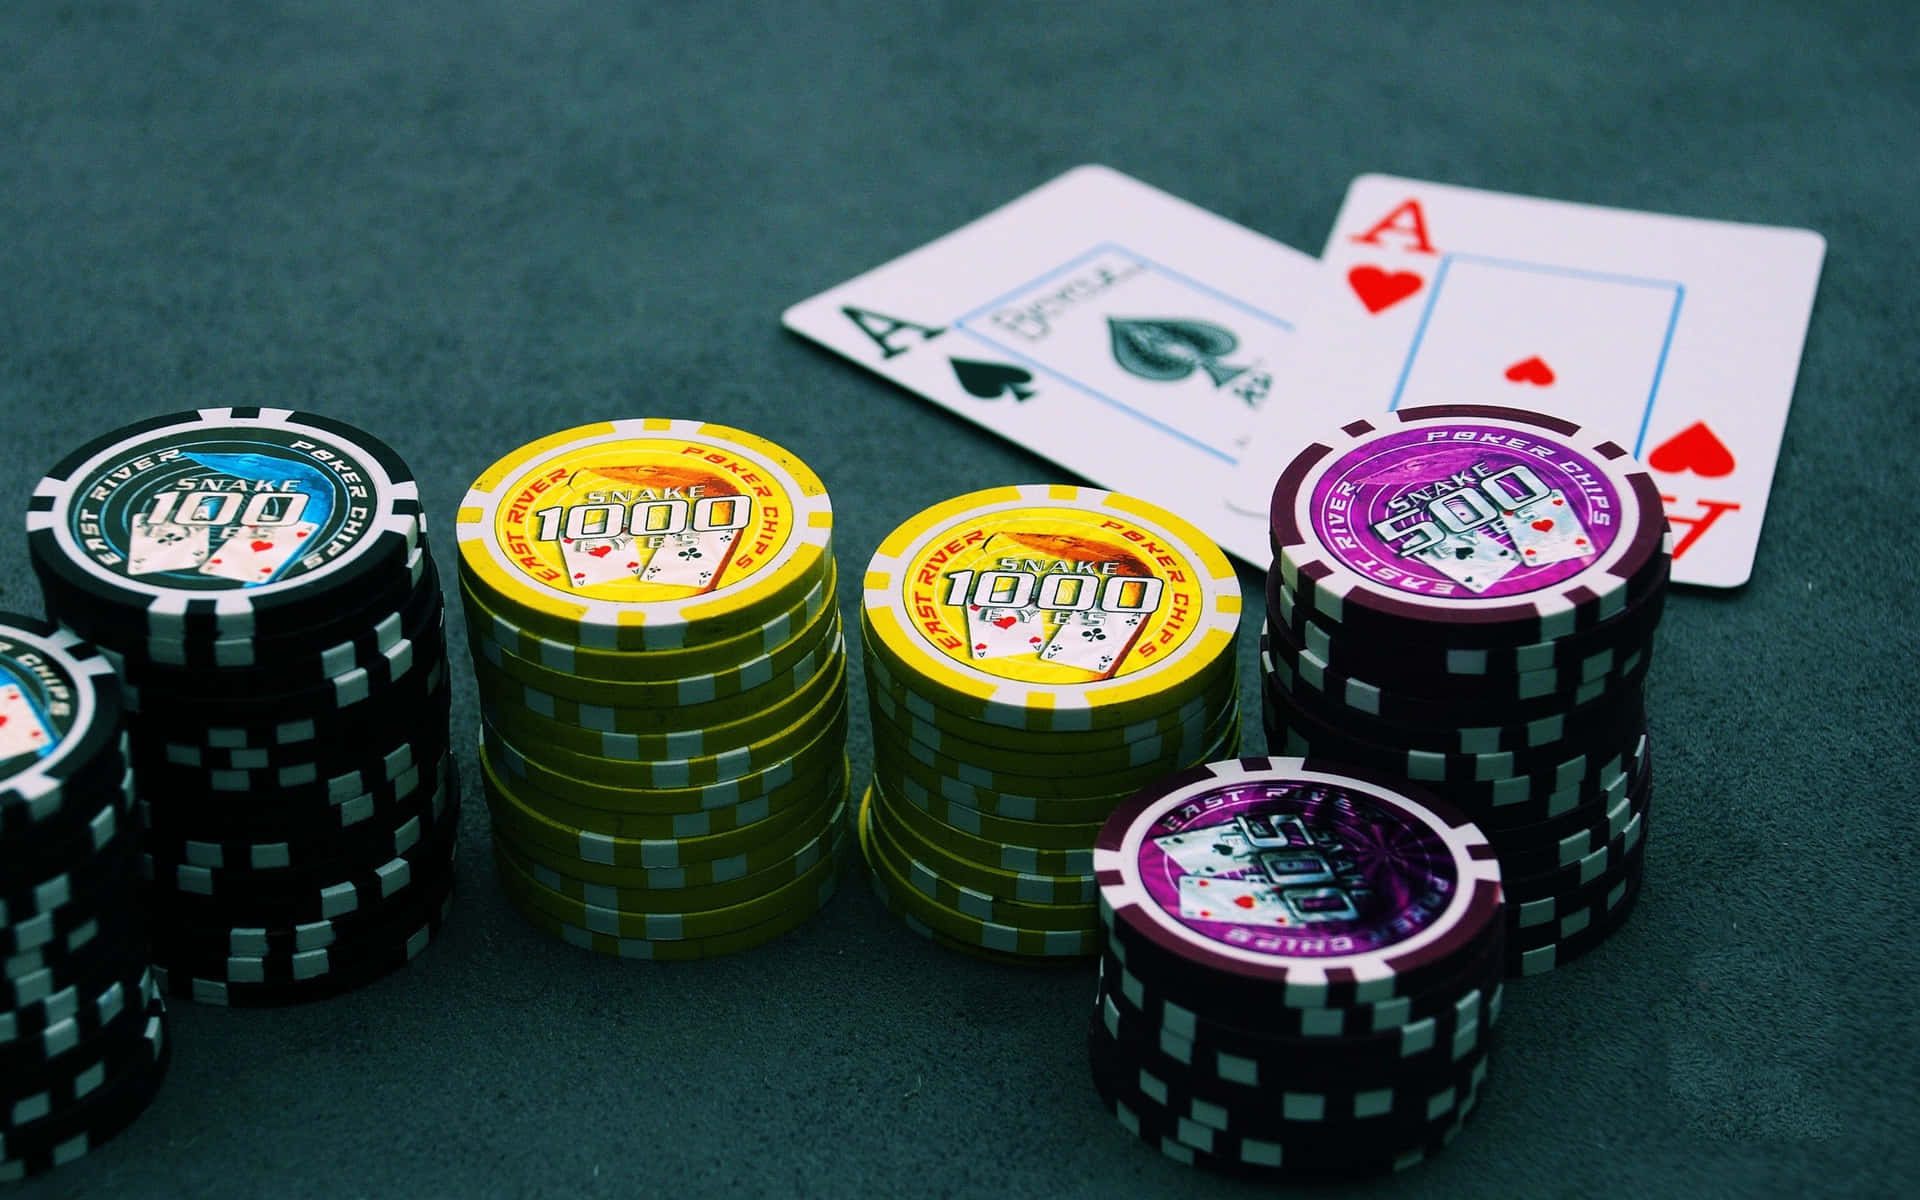 A Pile Of Poker Chips And Cards